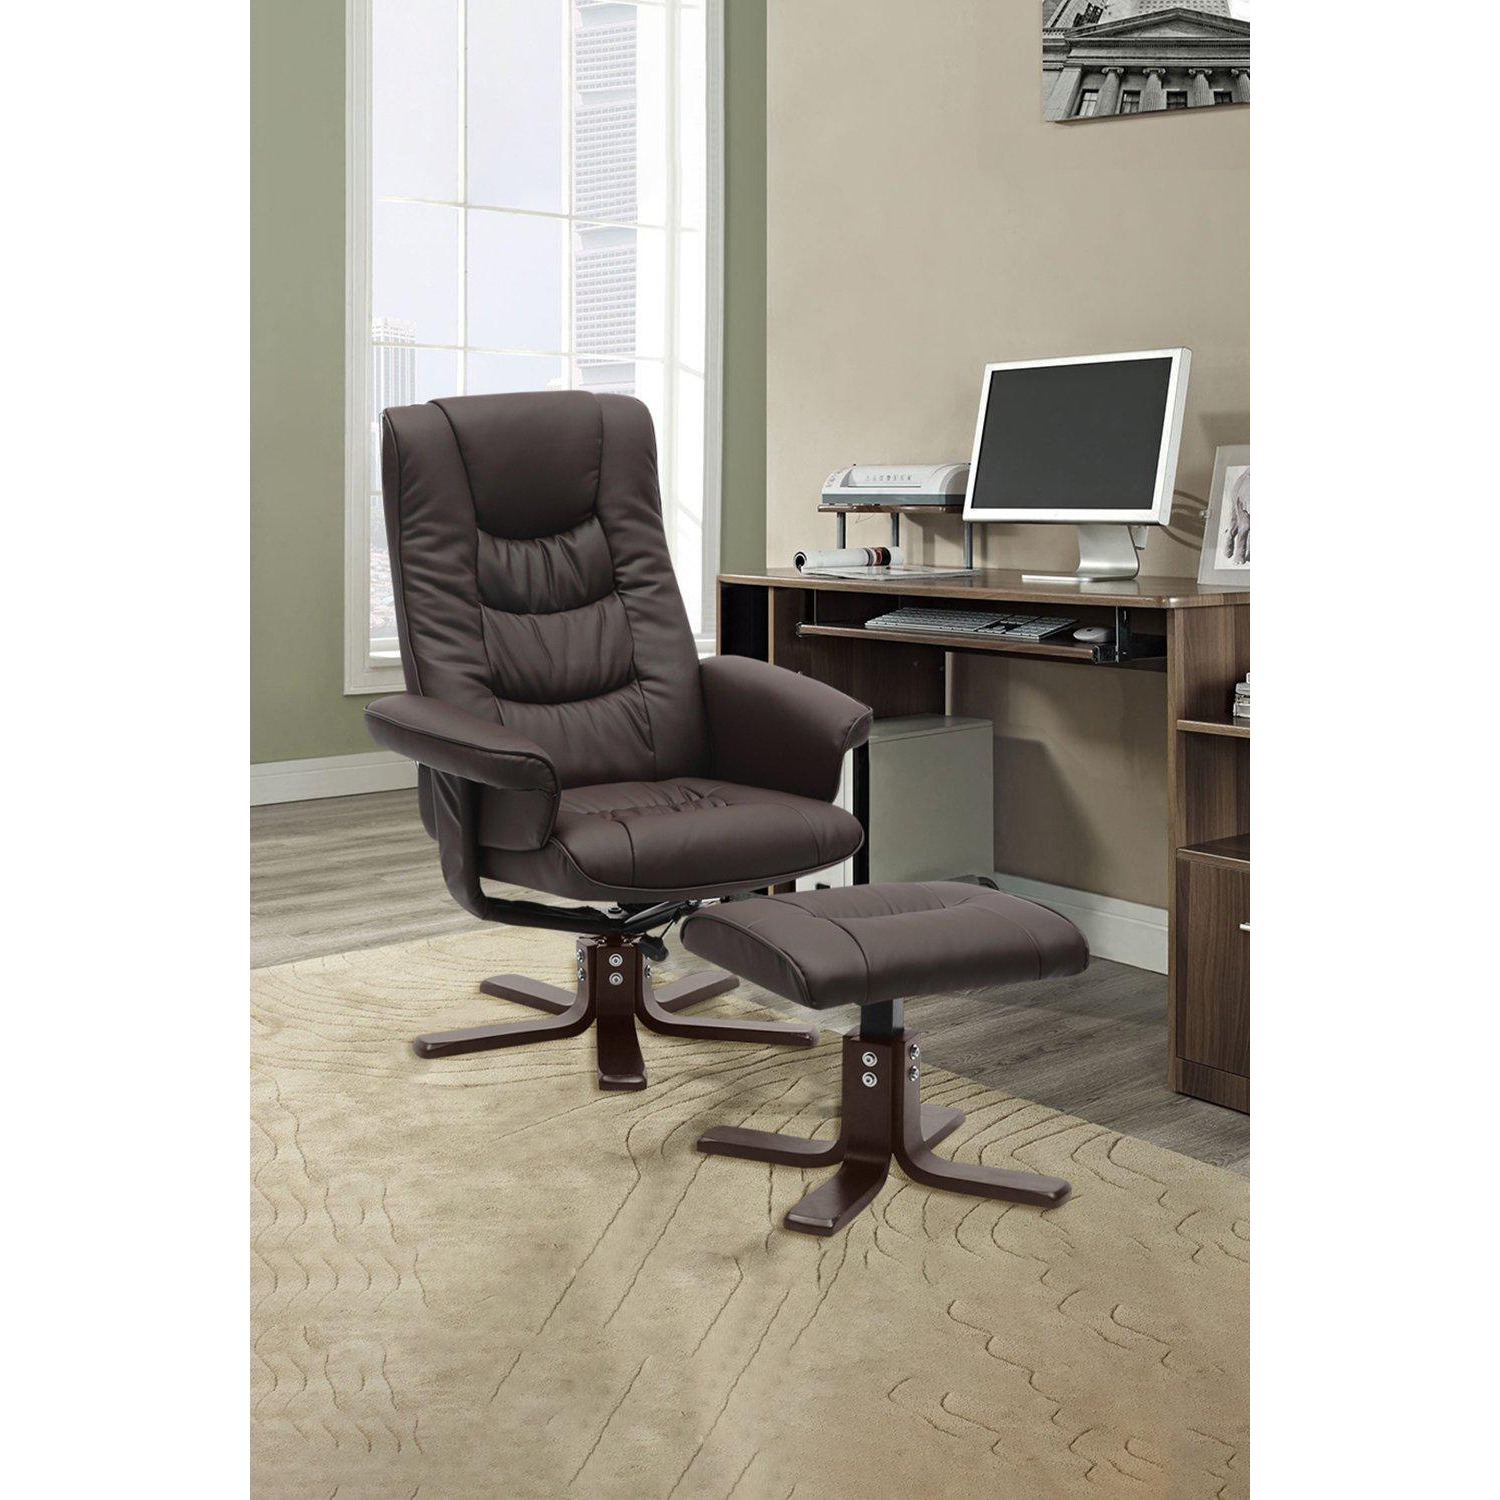 Brown PU Leather Adjustable Swivel Recliner with Footstool - image 1